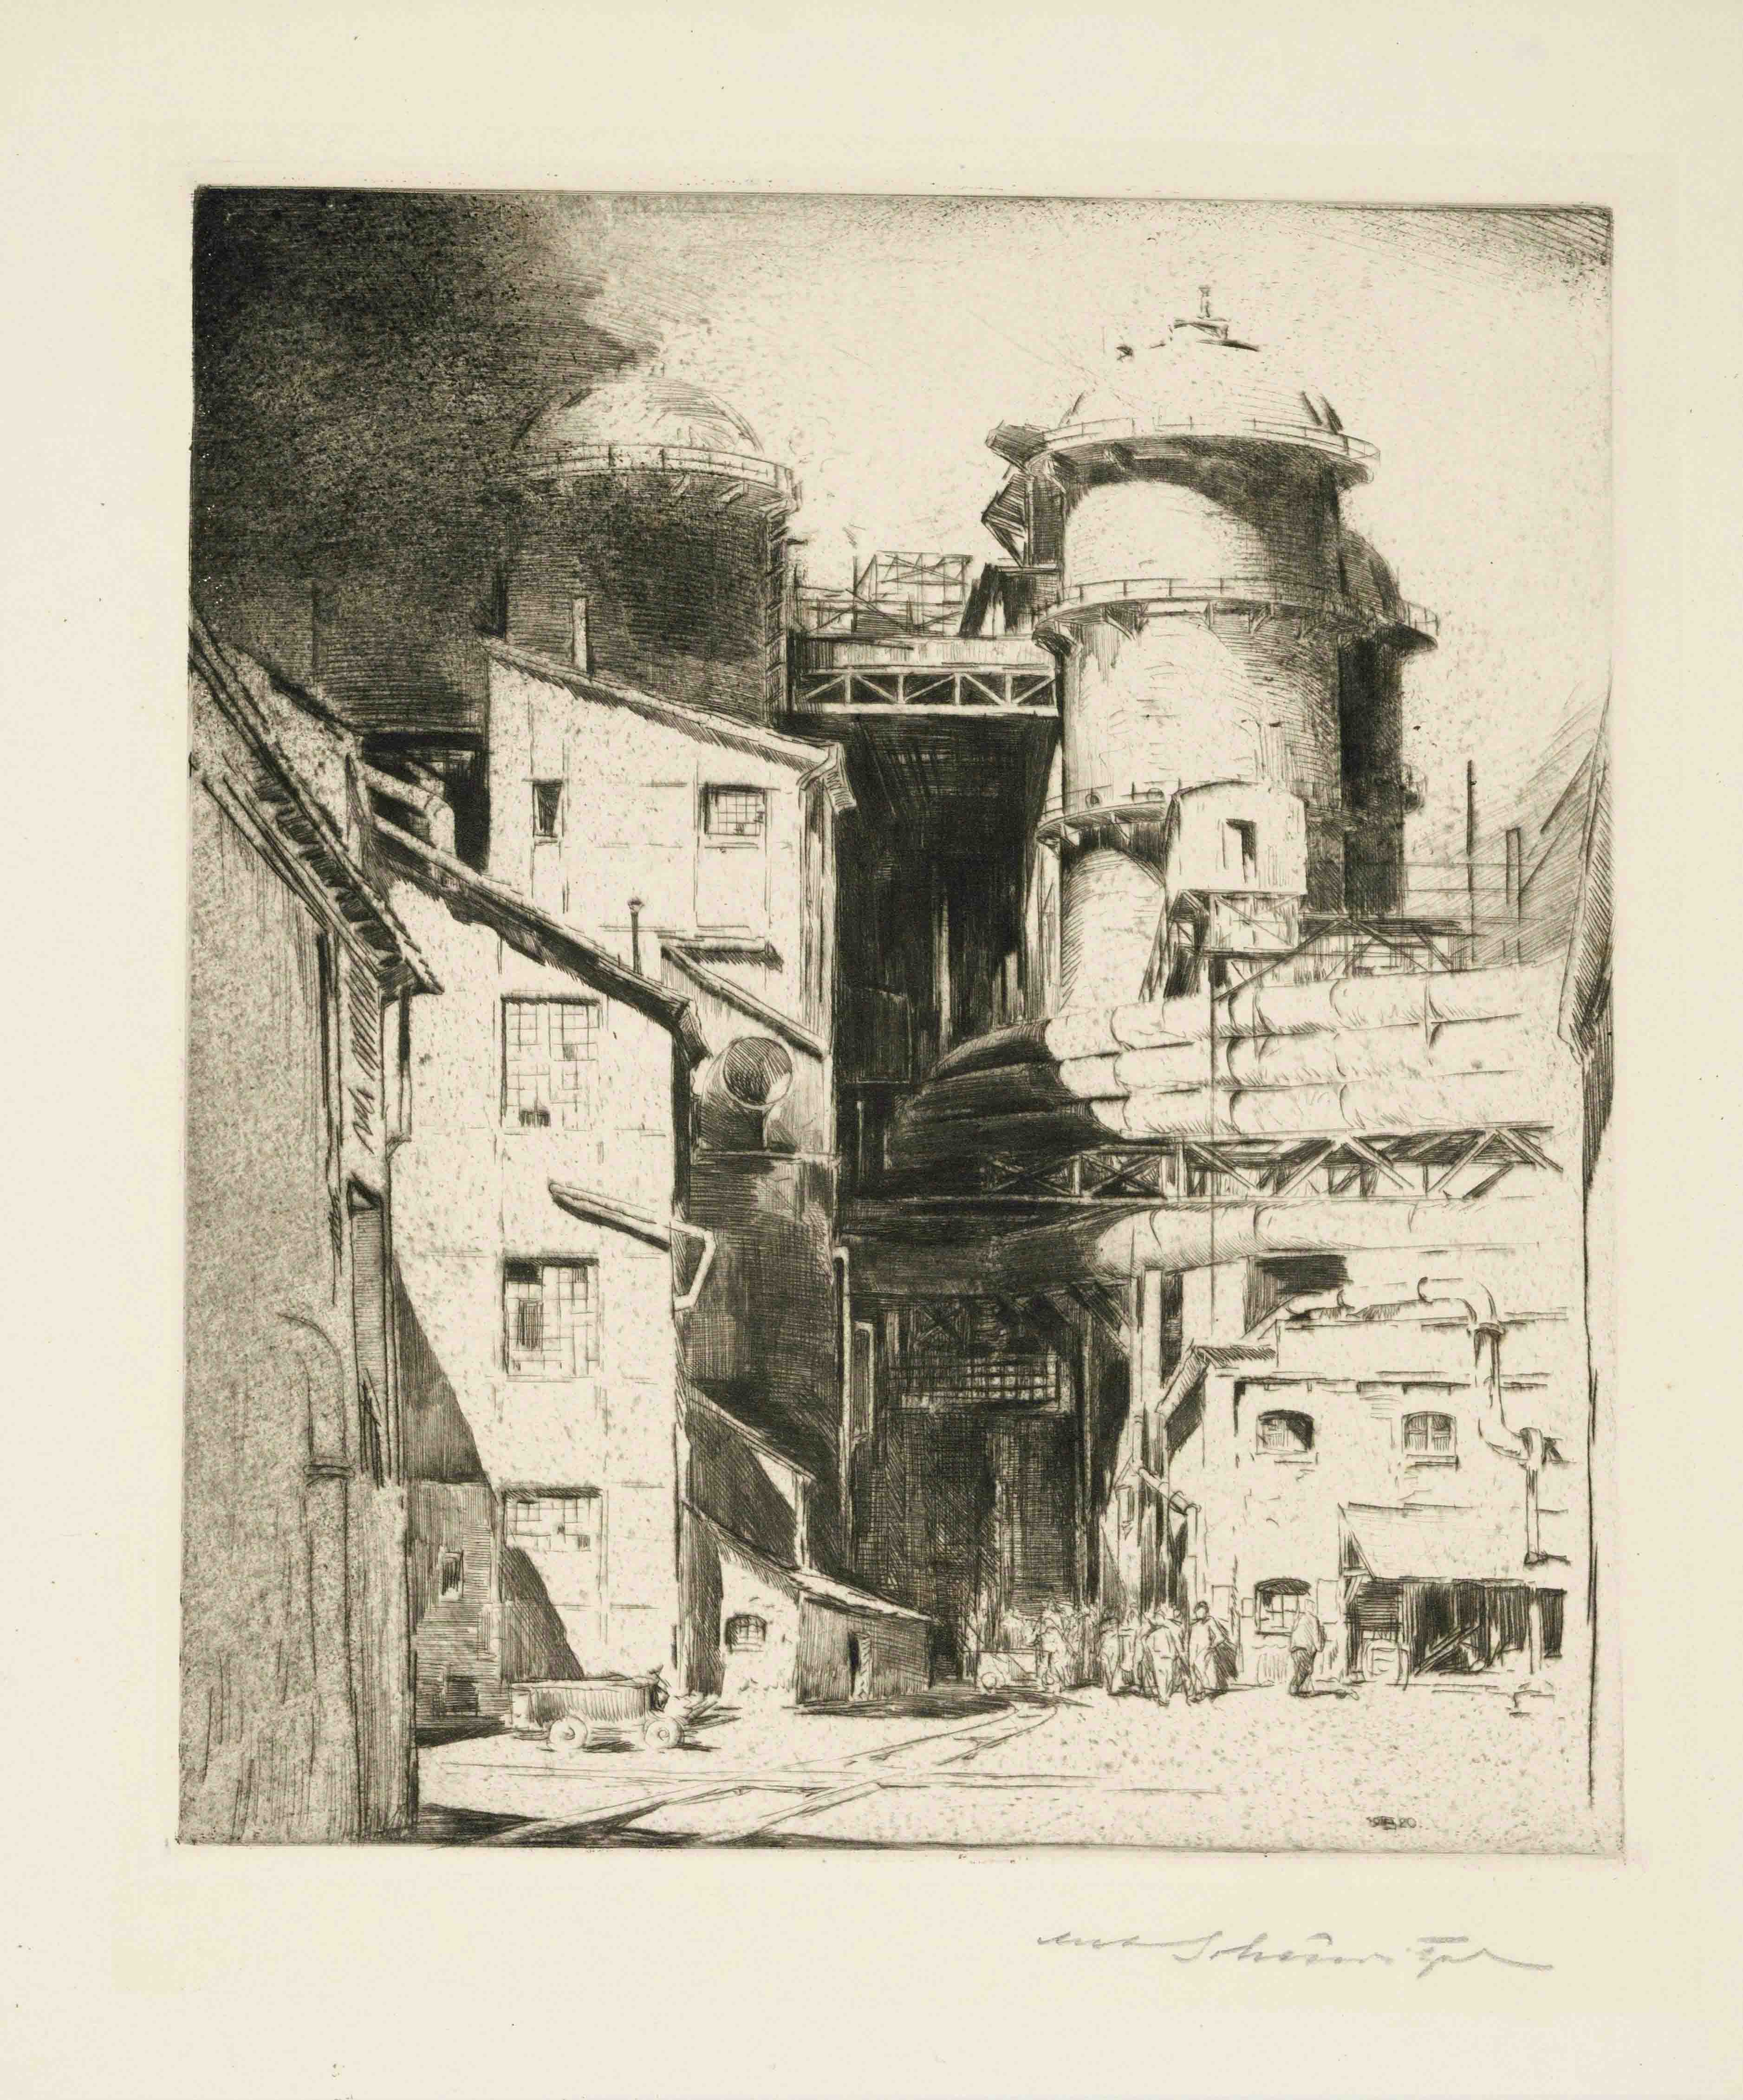 Anton Scheuritzel (1874-1954), bundle of 10 etchings and lithographs with industrial motifs, each - Image 3 of 4